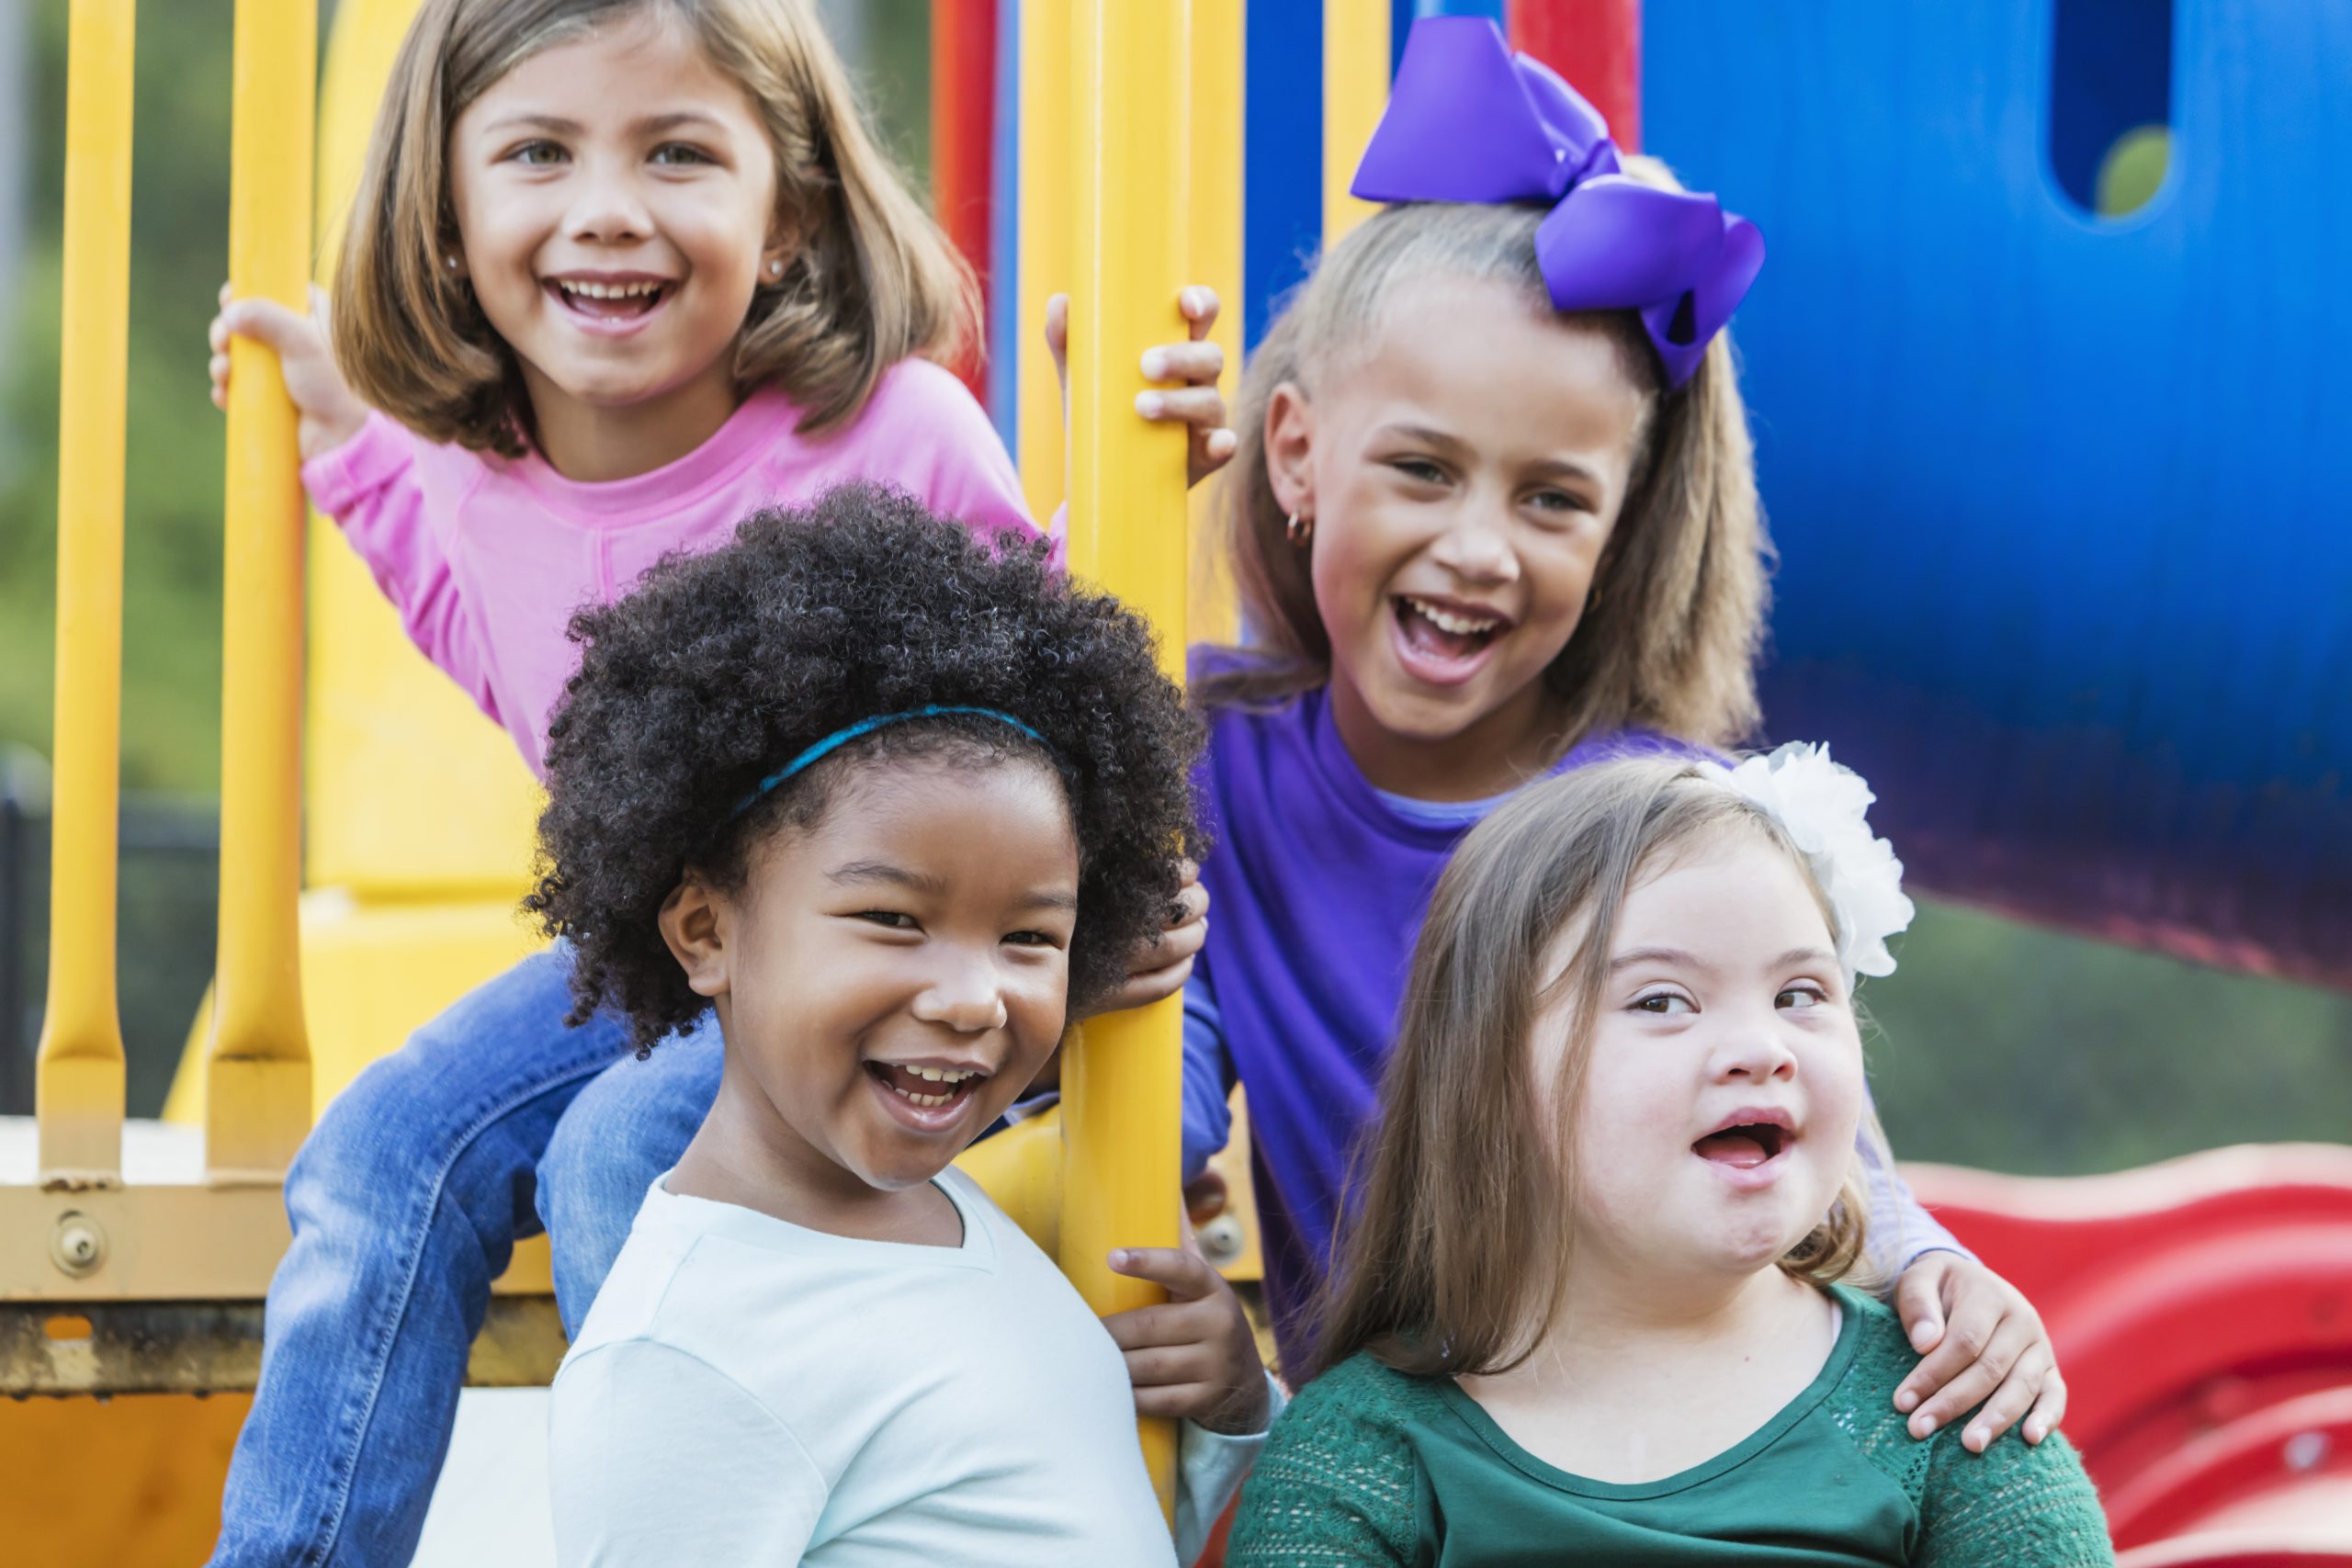 image: a group of diverse girls in a play park setting, one with obvious disabilities